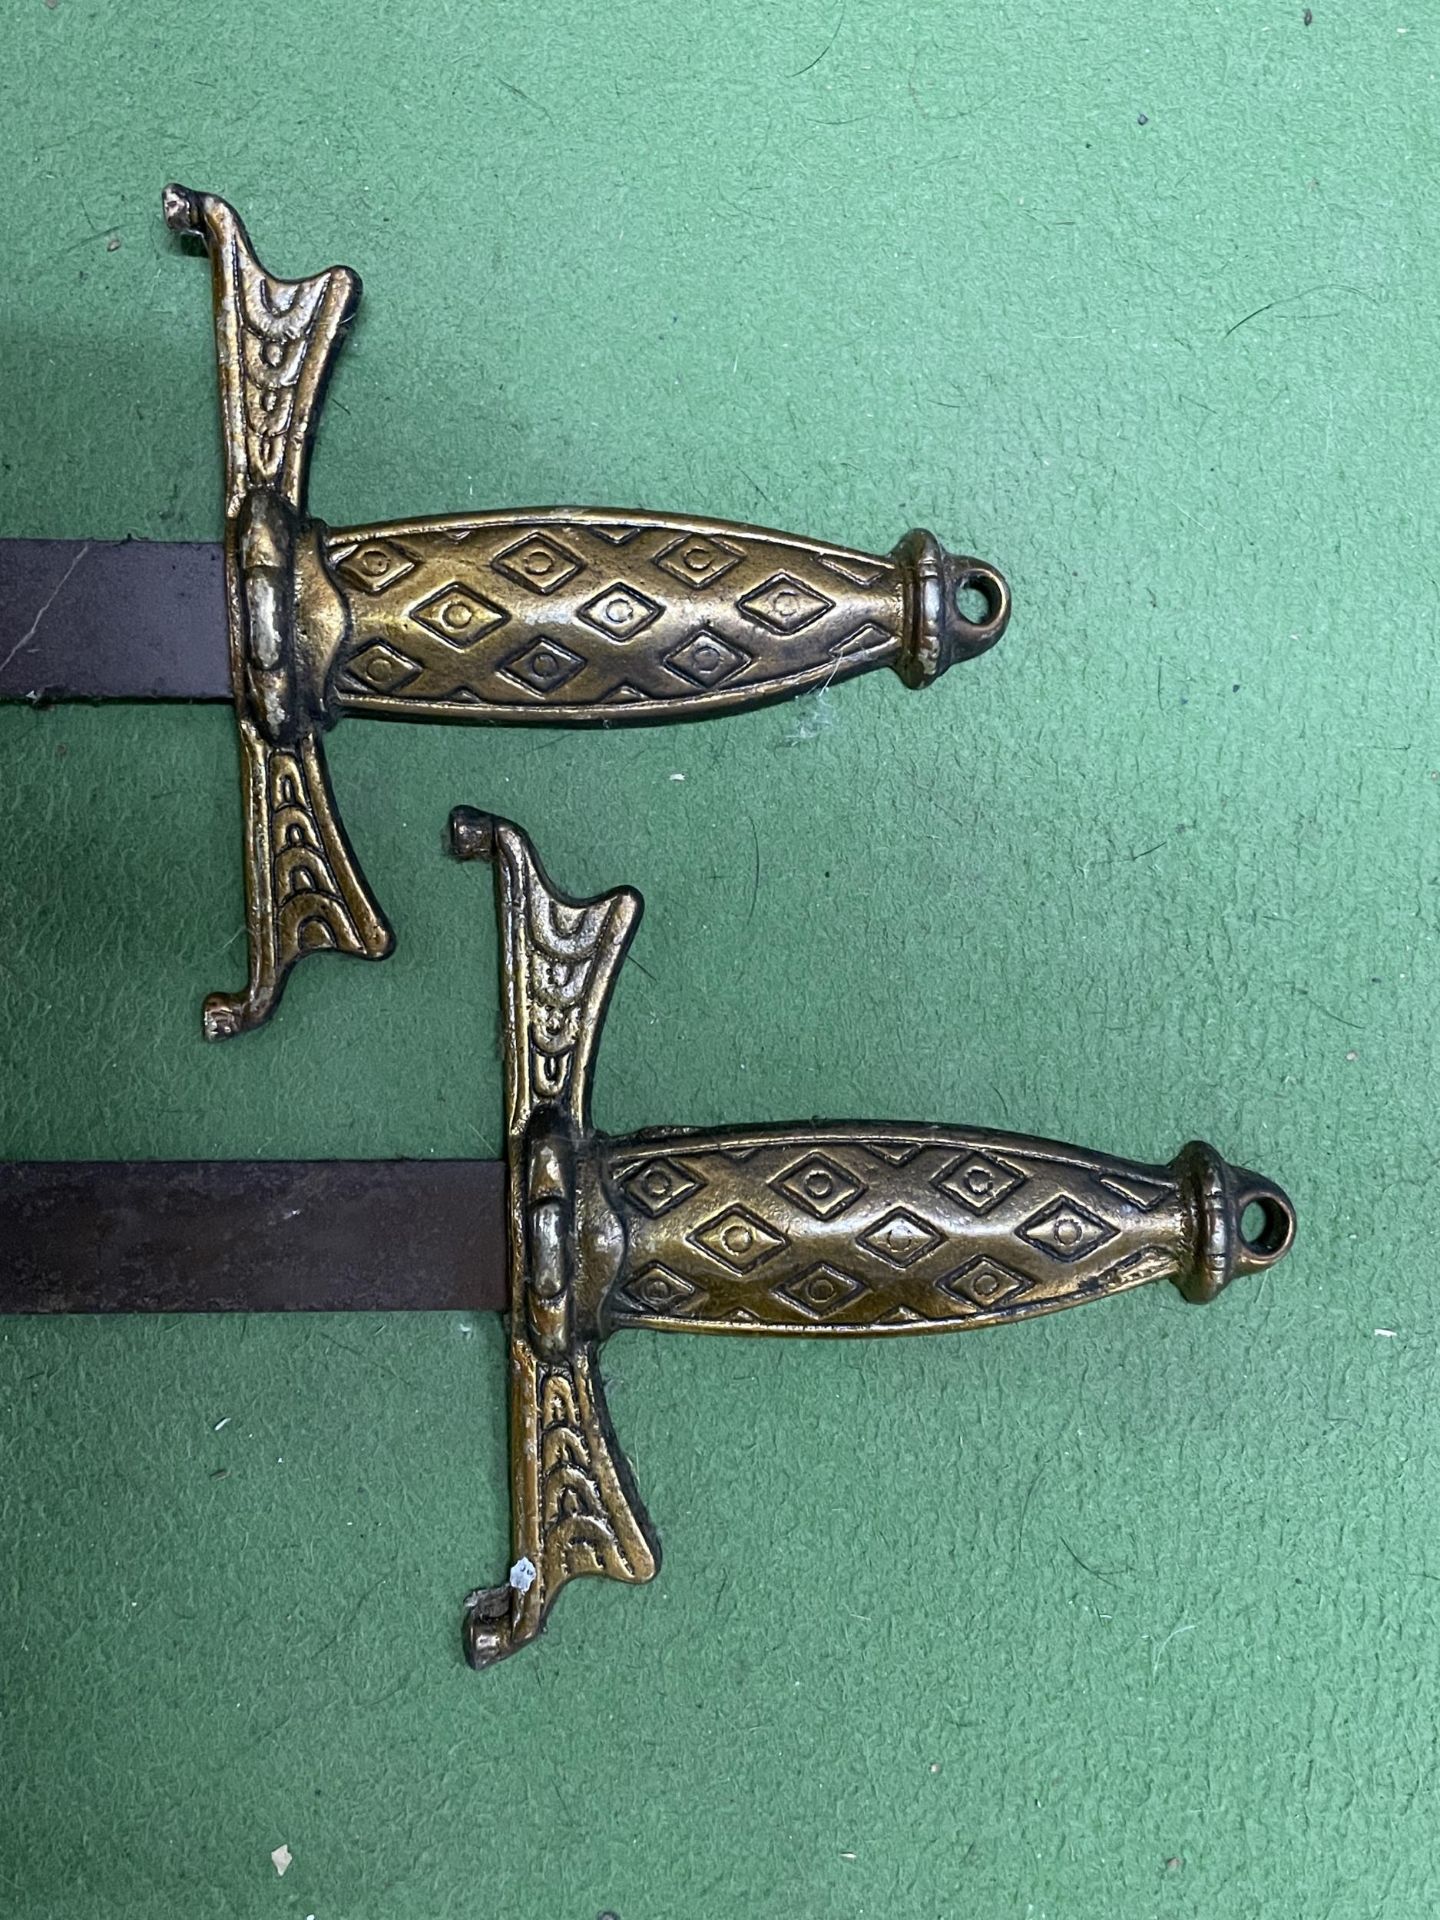 A PAIR OF VINTAGE SWORDS - Image 2 of 4